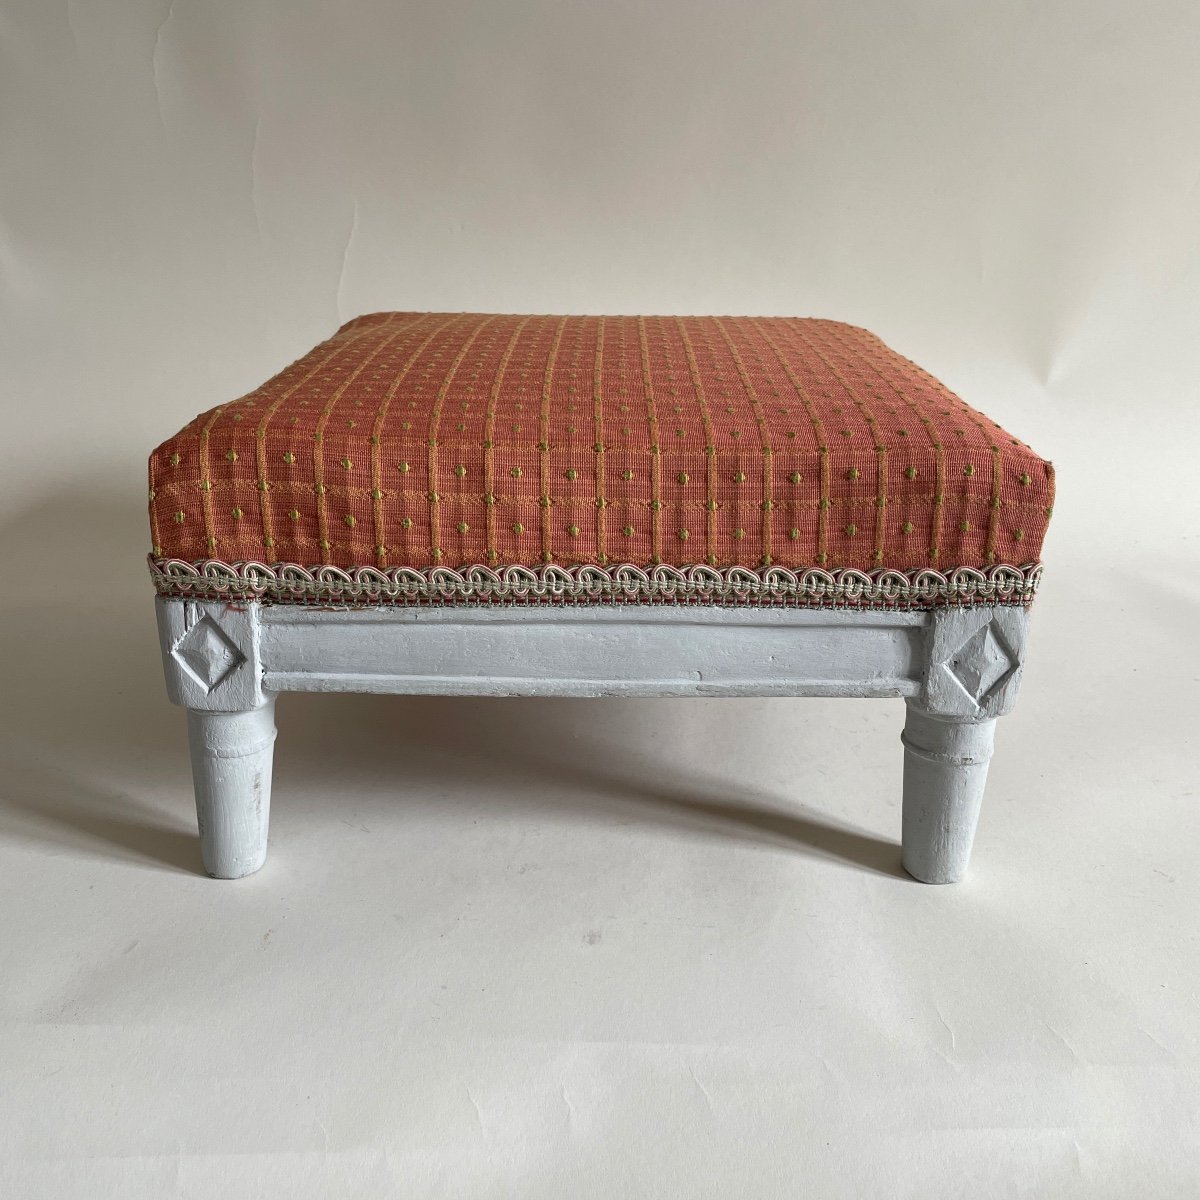 Footrest Stool In Lacquered Wood From The Directoire Period Late 18th Century - Early 19th Century-photo-3